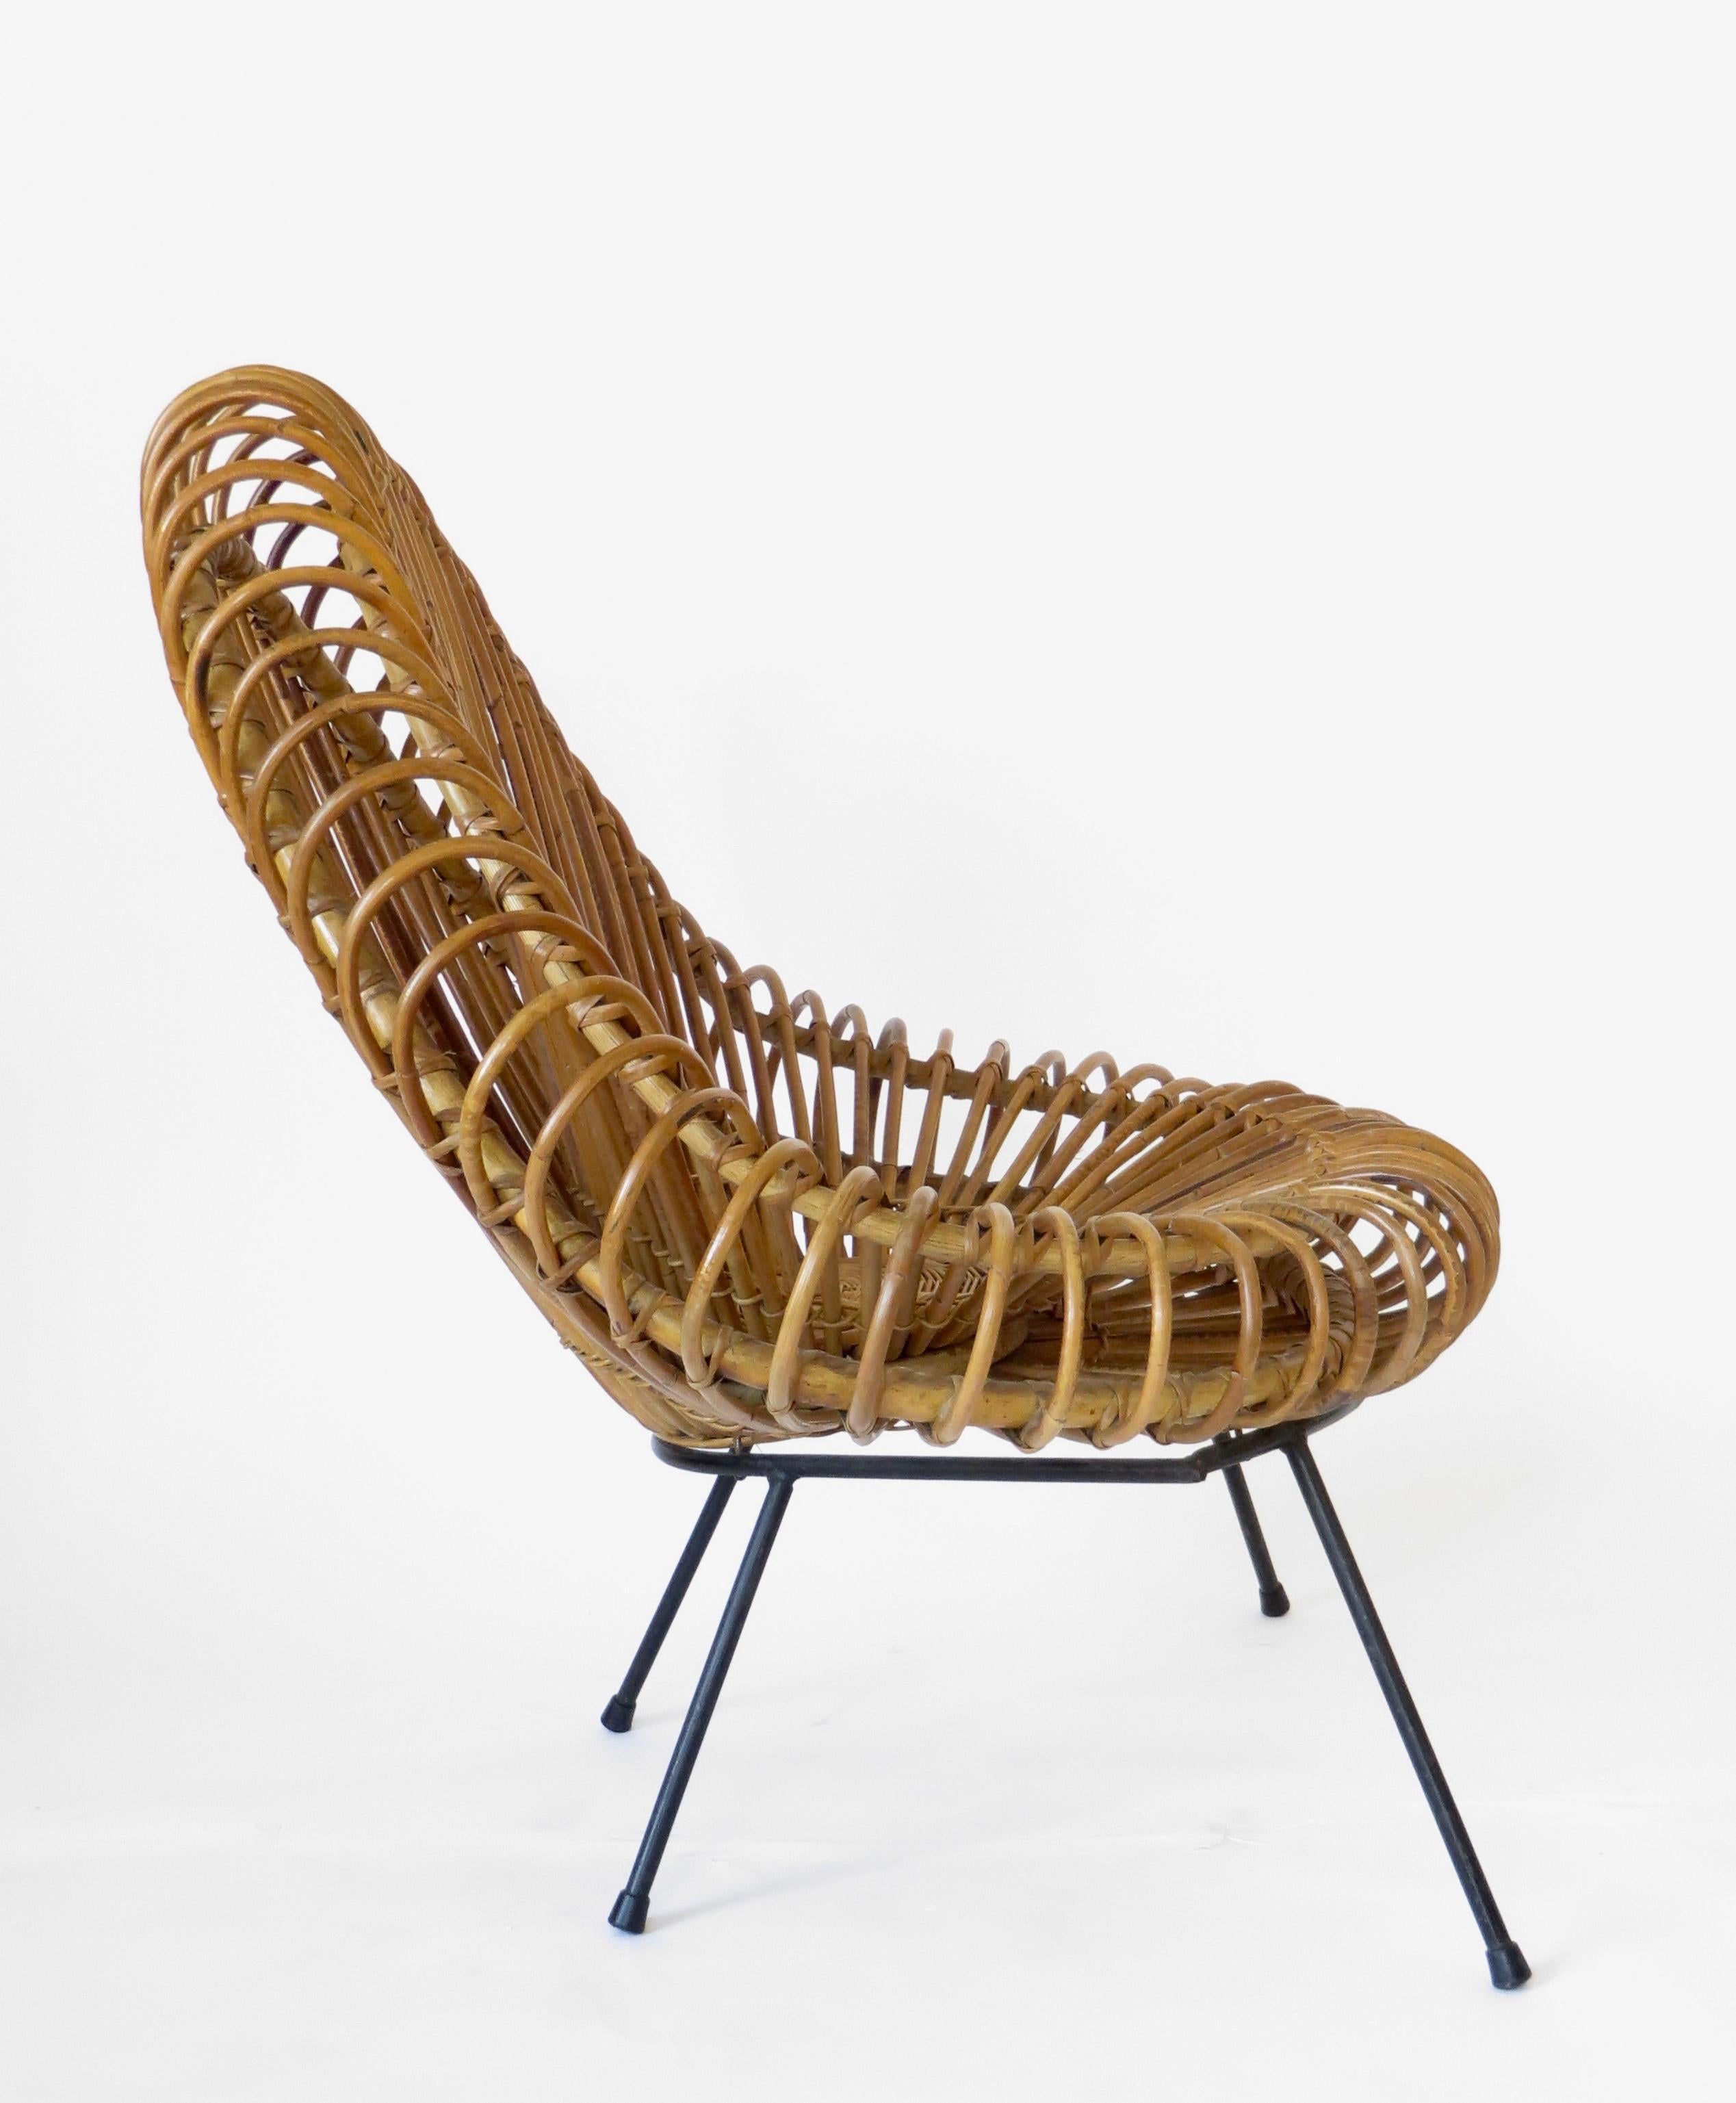 Janine Abraham and architect Dirk Jan Rol rattan lounge chair manufactured by Edition Rougier, circa 1955.
The elegant basket seat shell is held by black lacquered steel frame. Manufactured by Edition Rougier.
Excellent condition with no breaks in